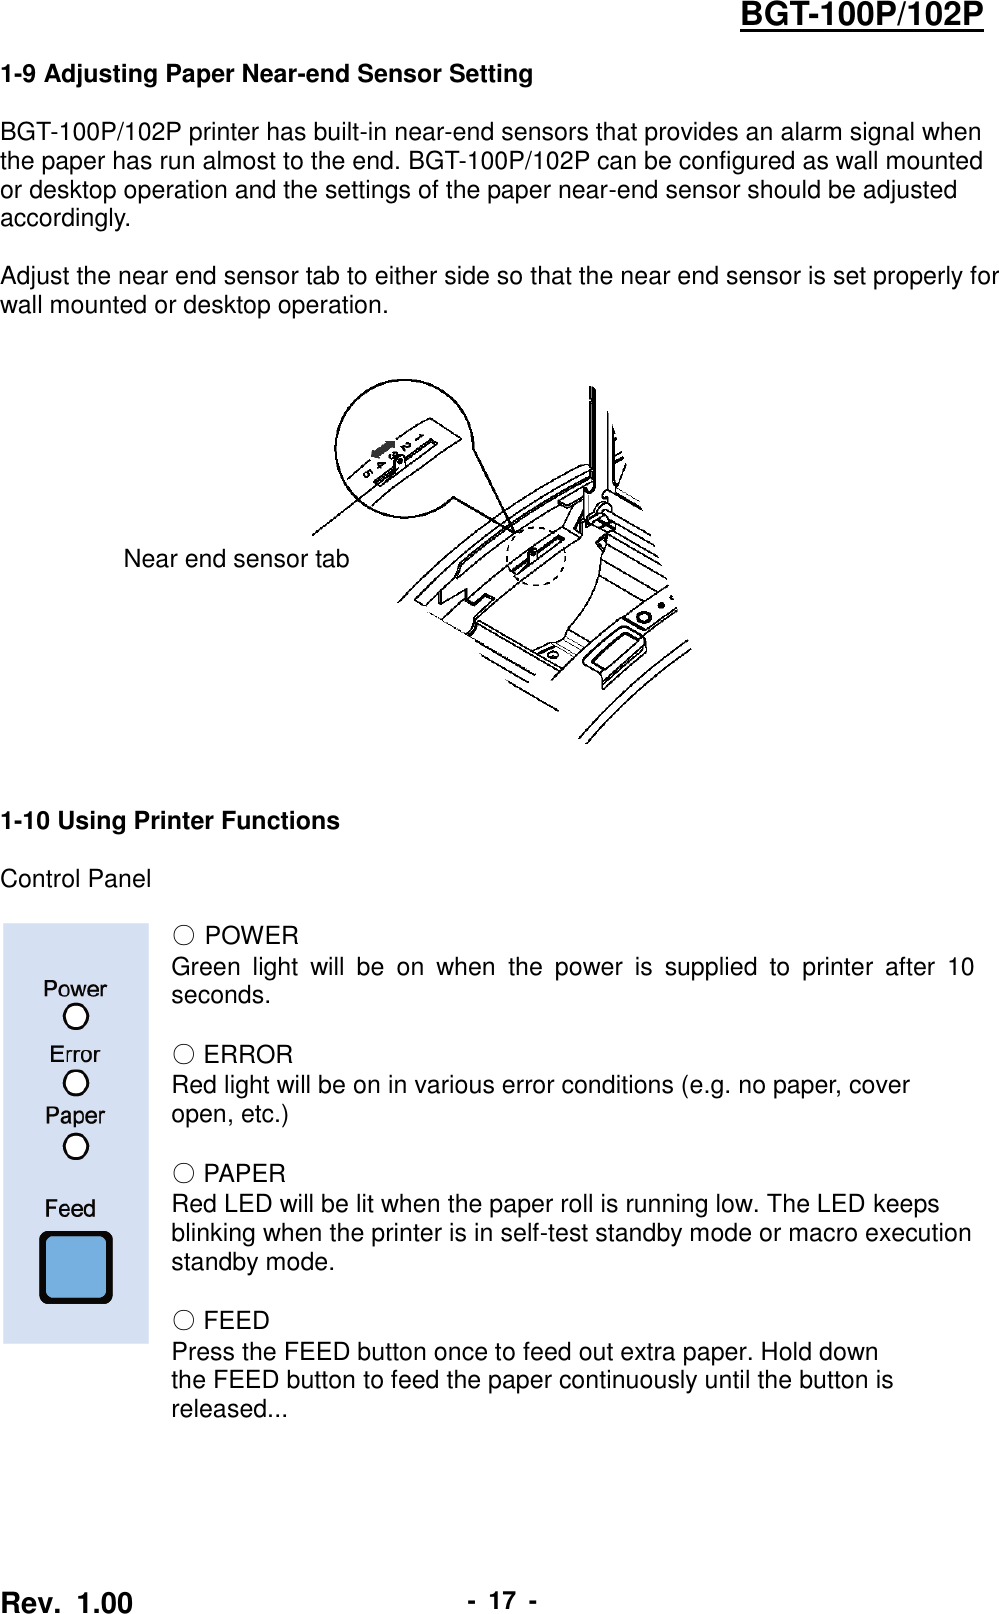  Rev.  1.00 -  17  - BGT-100P/102P 1-9 Adjusting Paper Near-end Sensor Setting  BGT-100P/102P printer has built-in near-end sensors that provides an alarm signal when the paper has run almost to the end. BGT-100P/102P can be configured as wall mounted or desktop operation and the settings of the paper near-end sensor should be adjusted accordingly.  Adjust the near end sensor tab to either side so that the near end sensor is set properly for wall mounted or desktop operation.        1-10 Using Printer Functions  Control Panel   ○ POWER Green  light  will  be  on  when  the  power  is  supplied  to  printer  after  10 seconds.  ○ ERROR Red light will be on in various error conditions (e.g. no paper, cover   open, etc.)      ○ PAPER Red LED will be lit when the paper roll is running low. The LED keeps   blinking when the printer is in self-test standby mode or macro execution   standby mode.  ○ FEED Press the FEED button once to feed out extra paper. Hold down   the FEED button to feed the paper continuously until the button is released... Near end sensor tab 